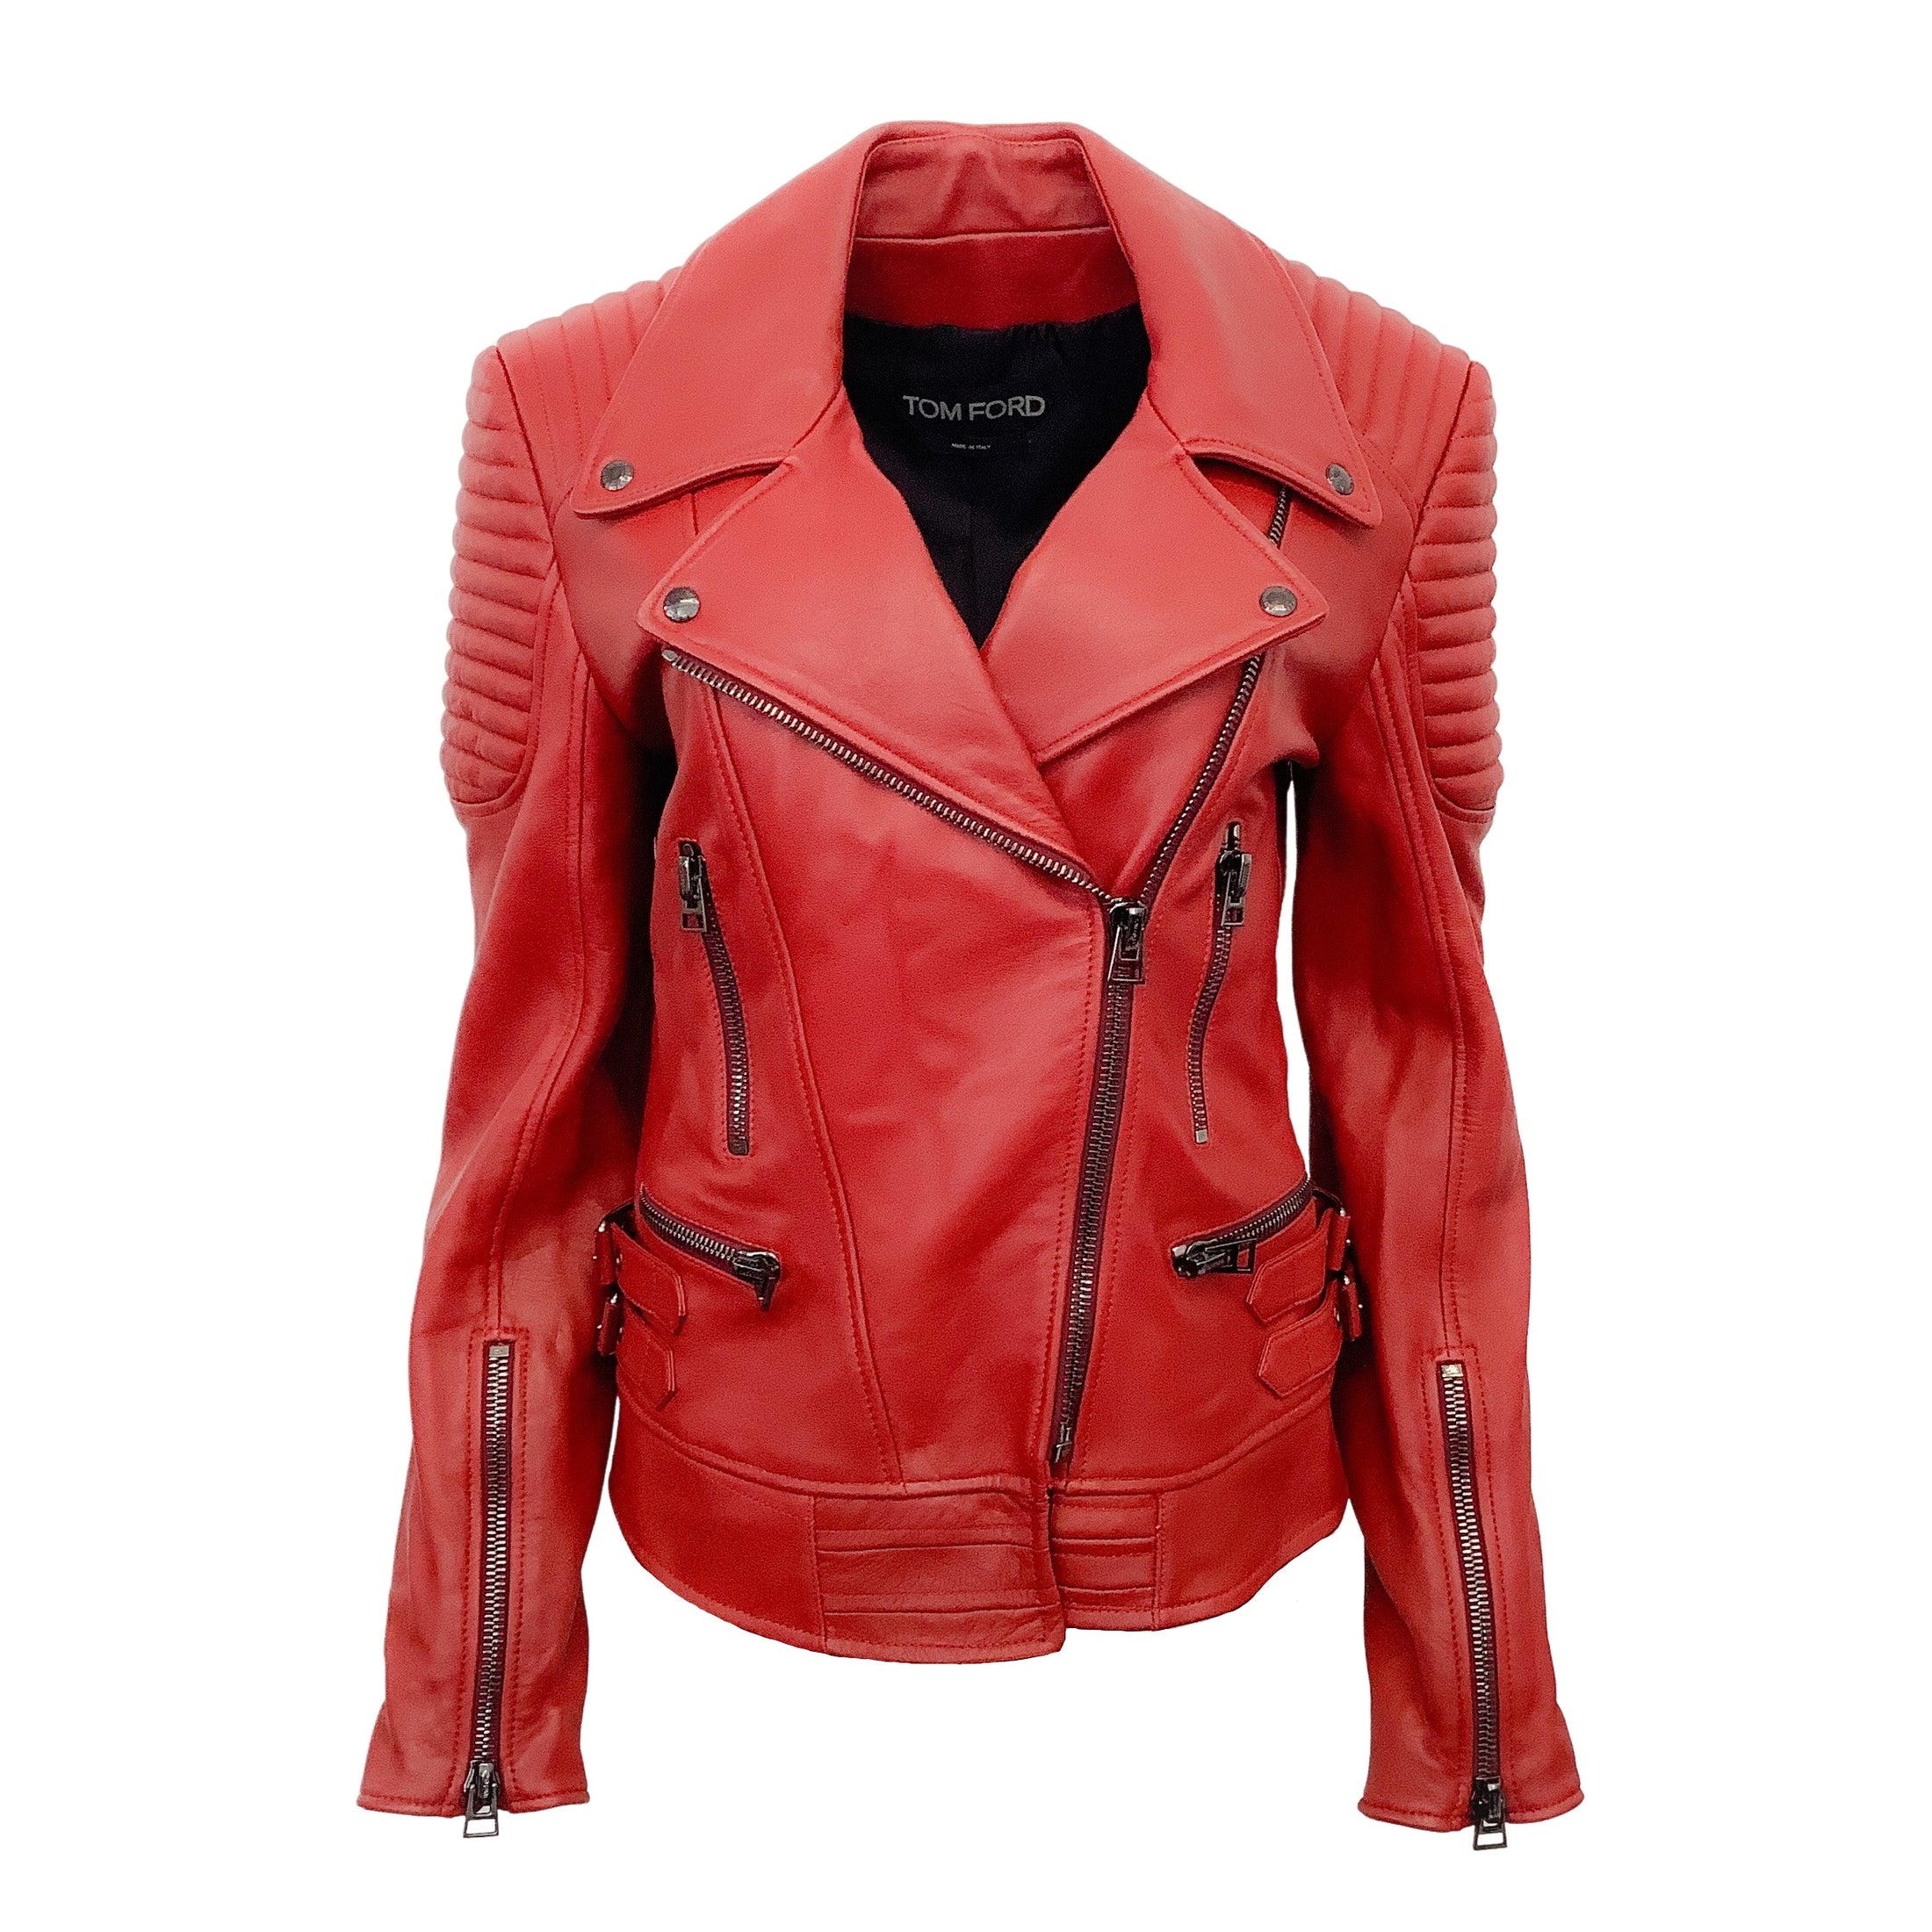 Tom Ford Red Leather Moto Jacket